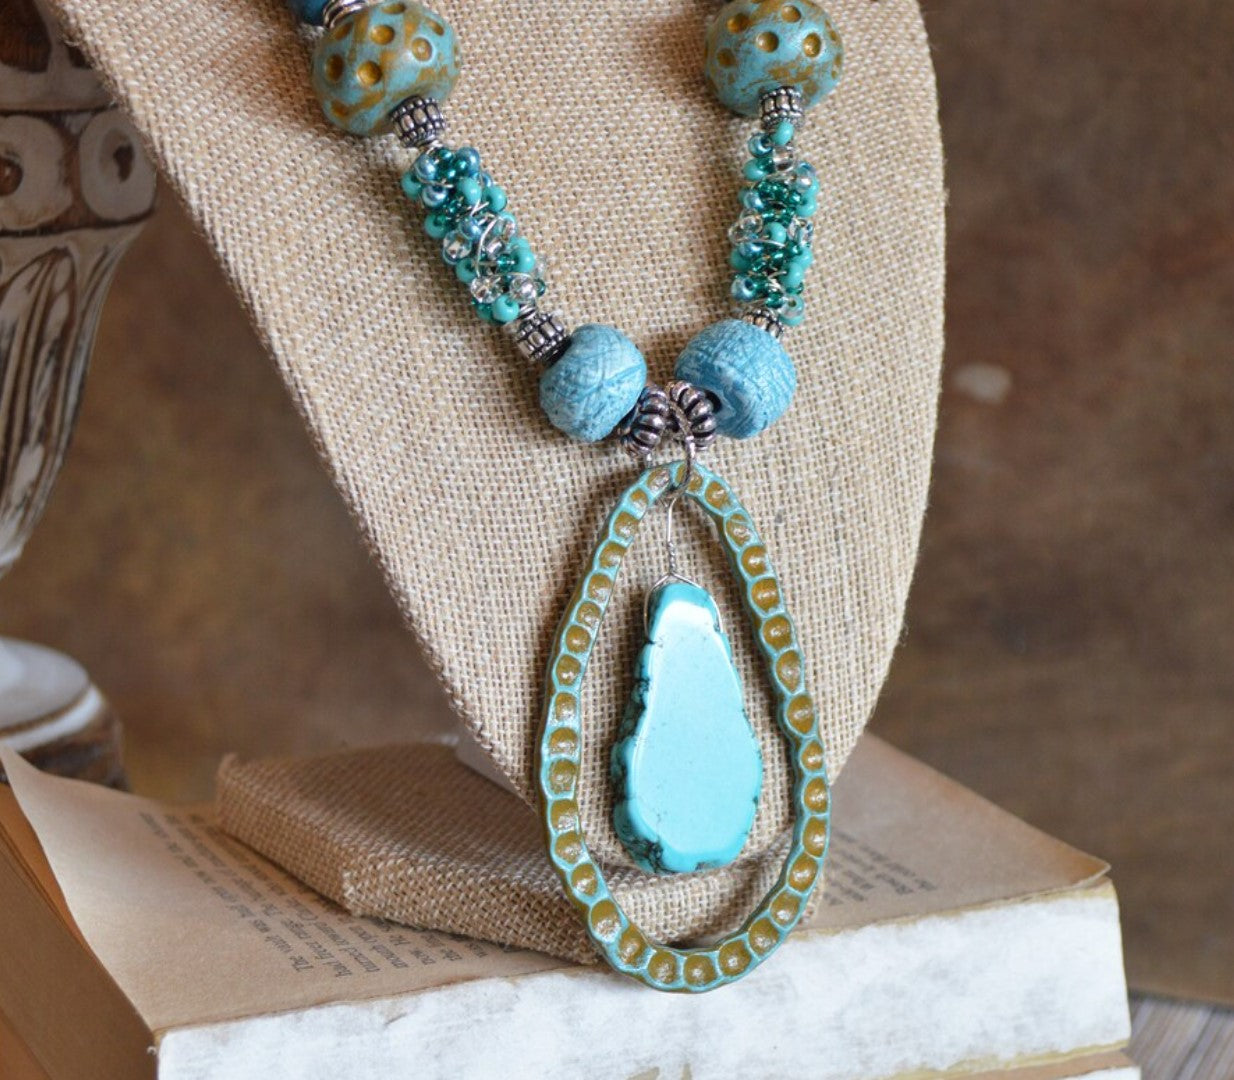 One of a kind statement beads polymer clay pendant necklace / earthy turquoise blues